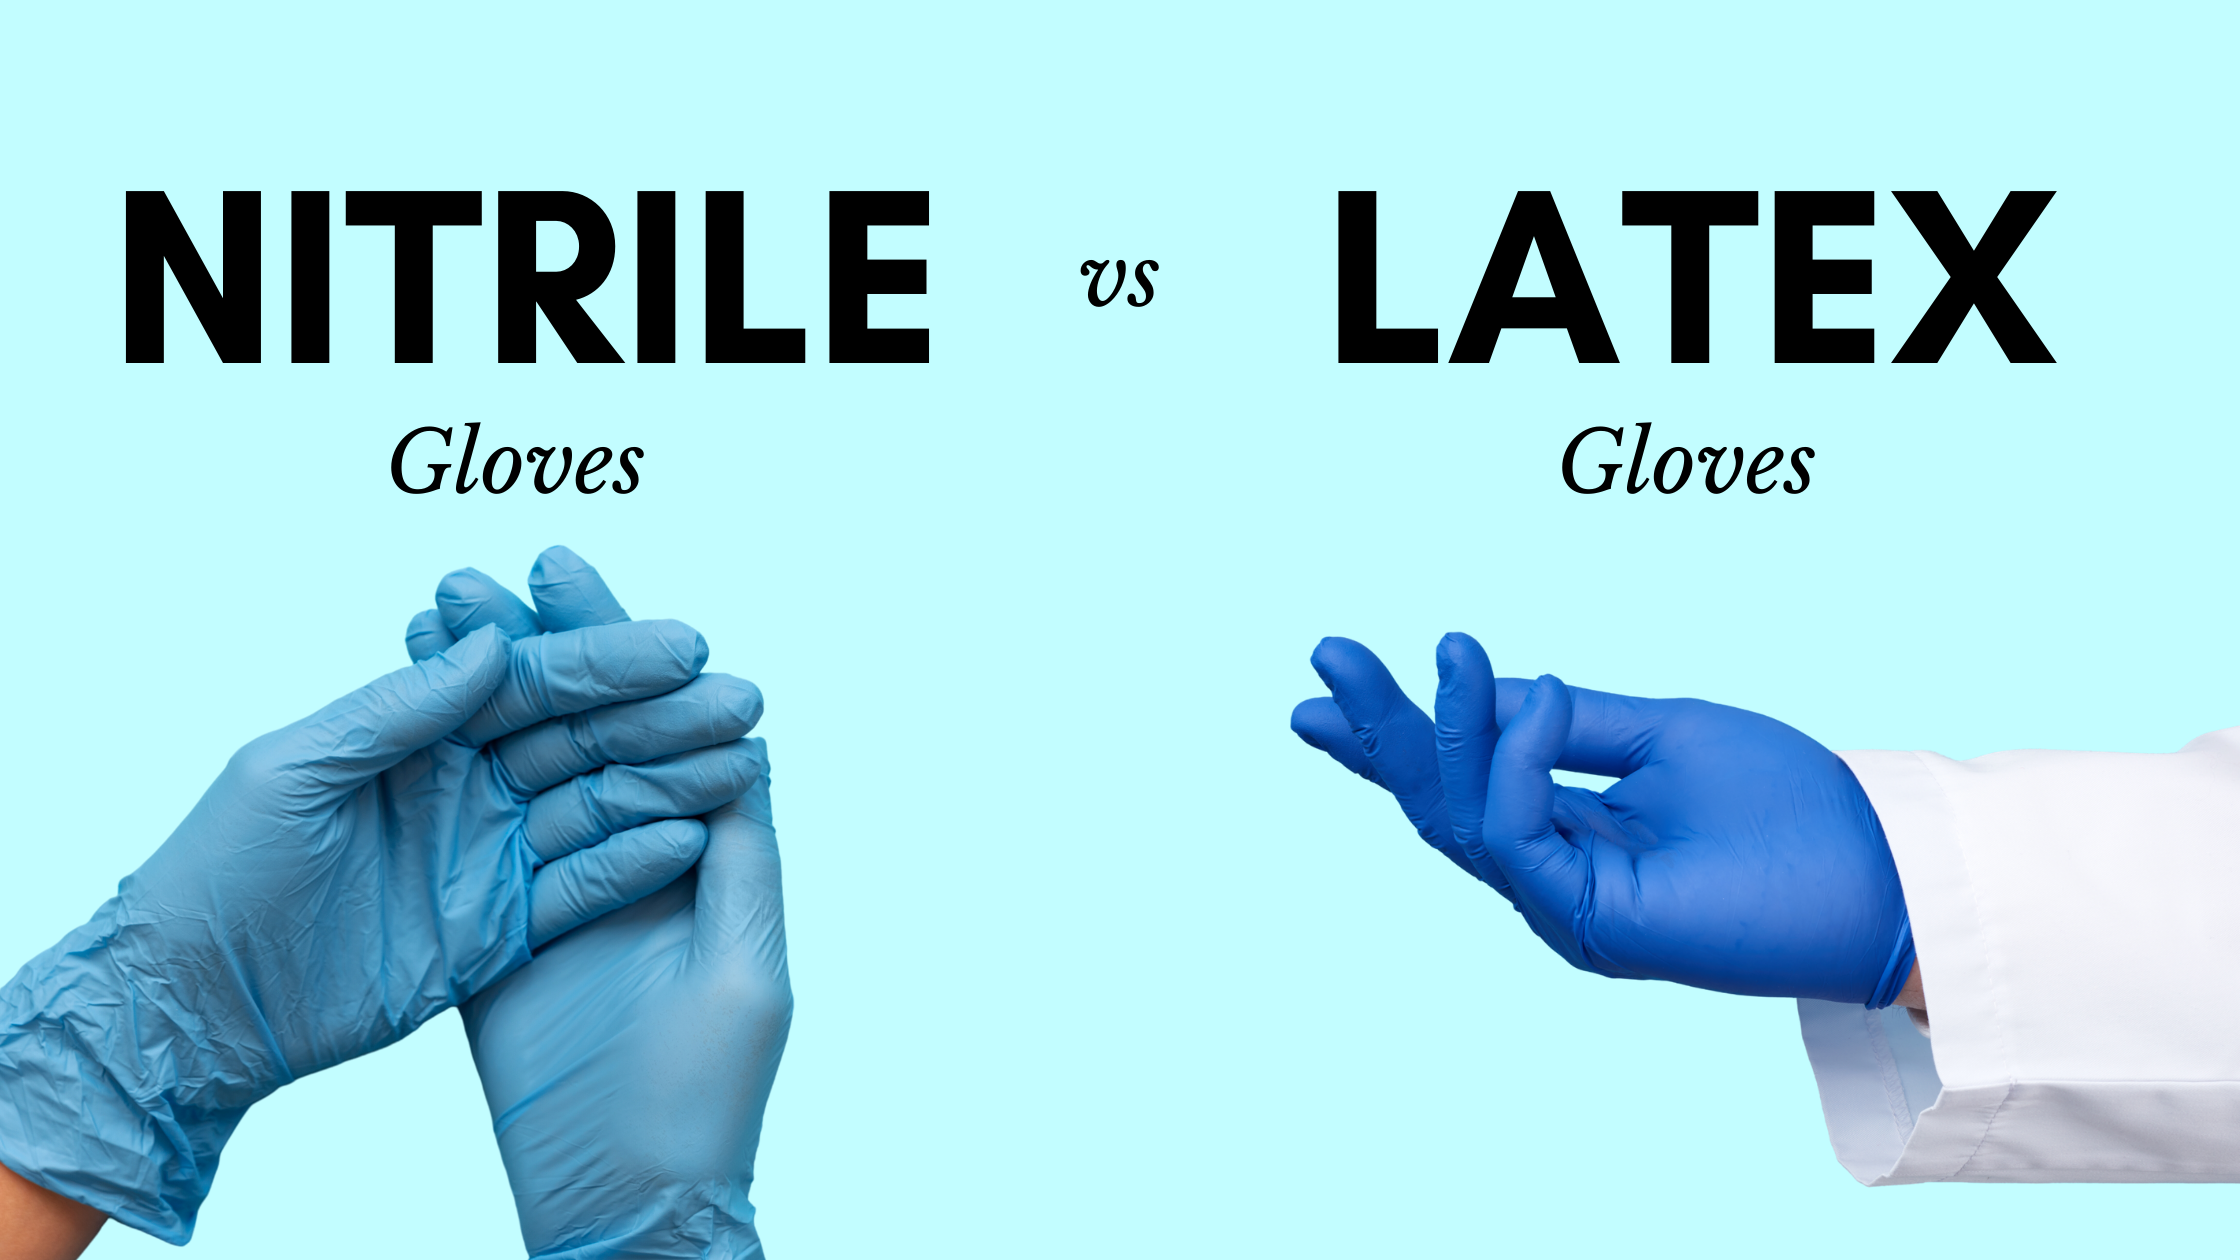 Why nitrile gloves is better than latex gloves 